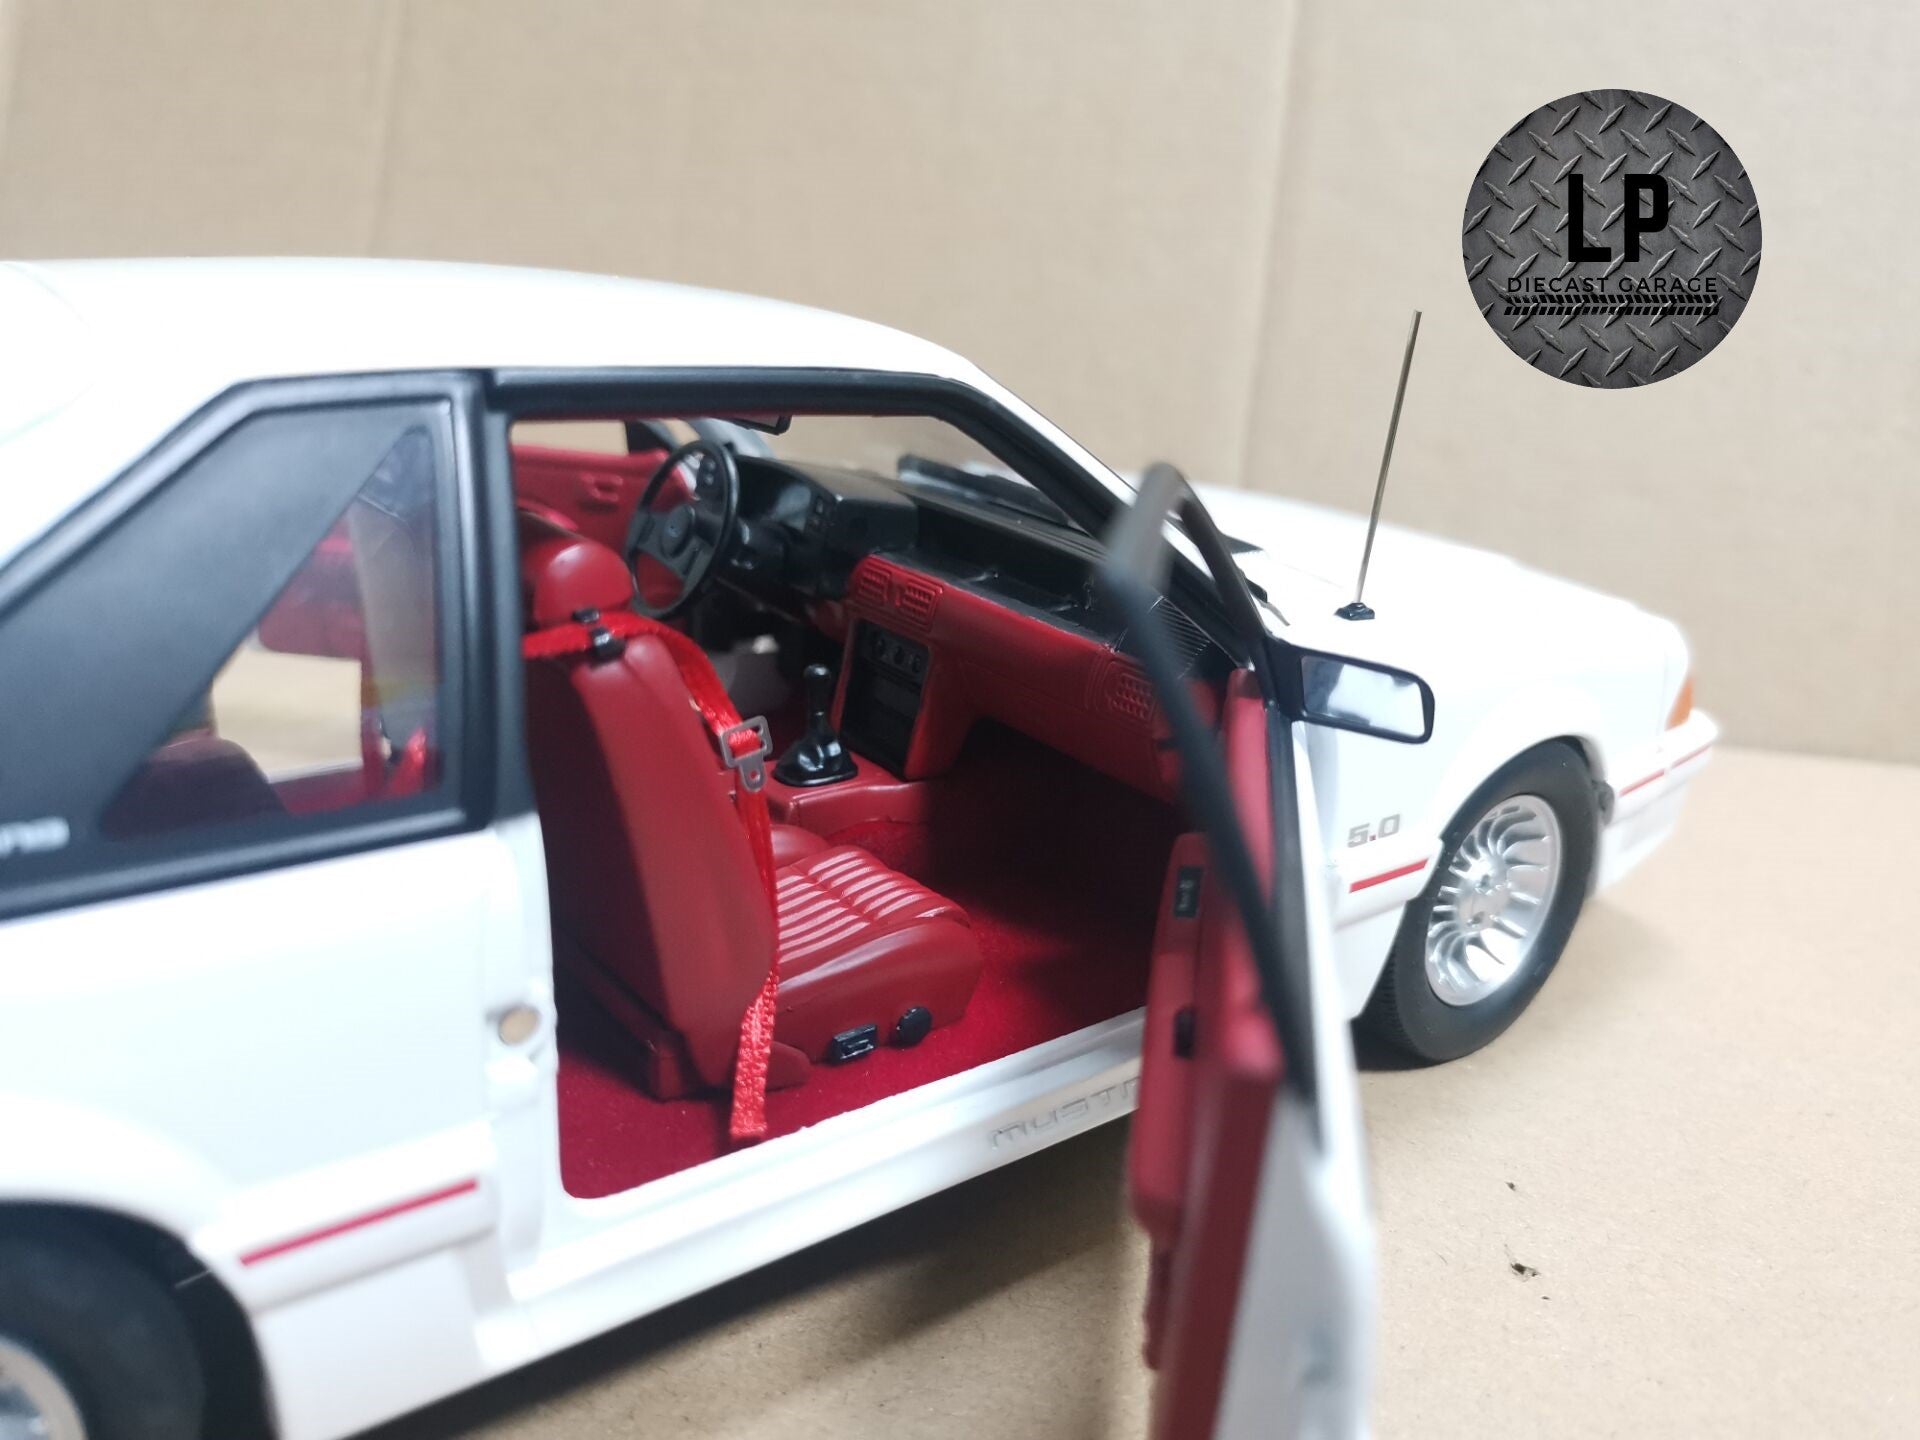 GMP GMP-19003 1:18 Scale 1993 Ford Mustang Diecast Model